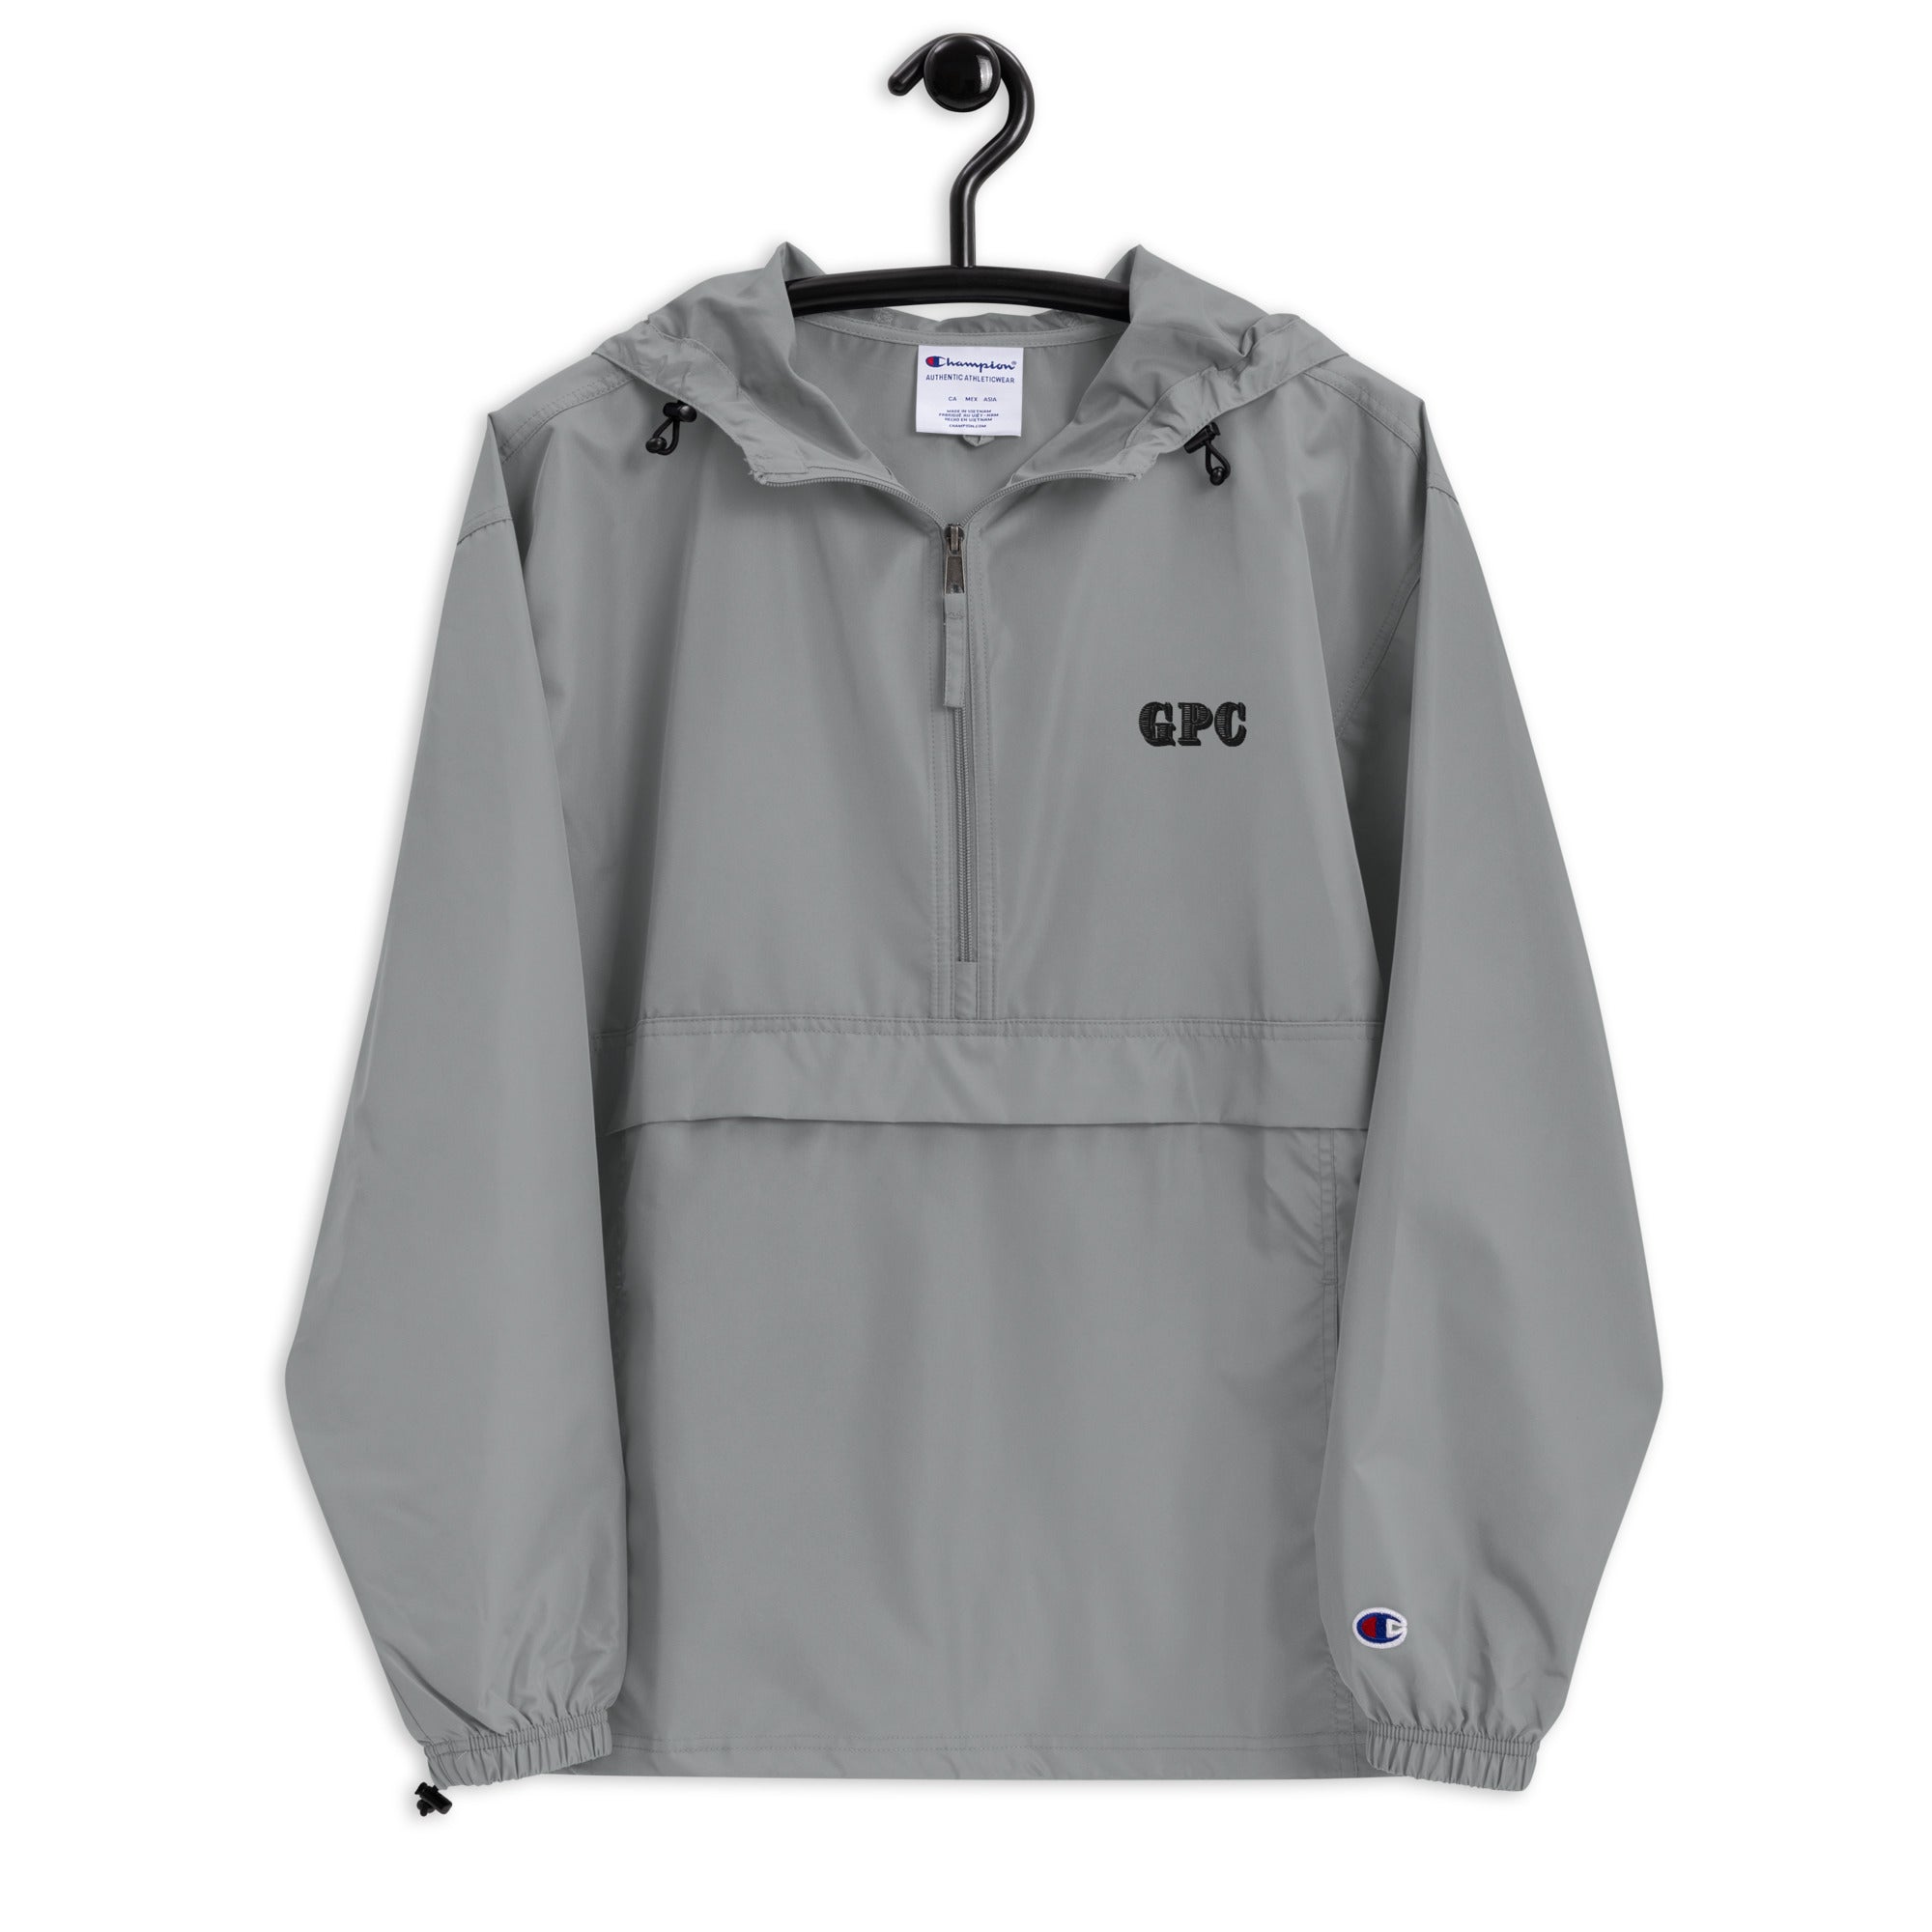 The GPC Embroidered Champion Anorak